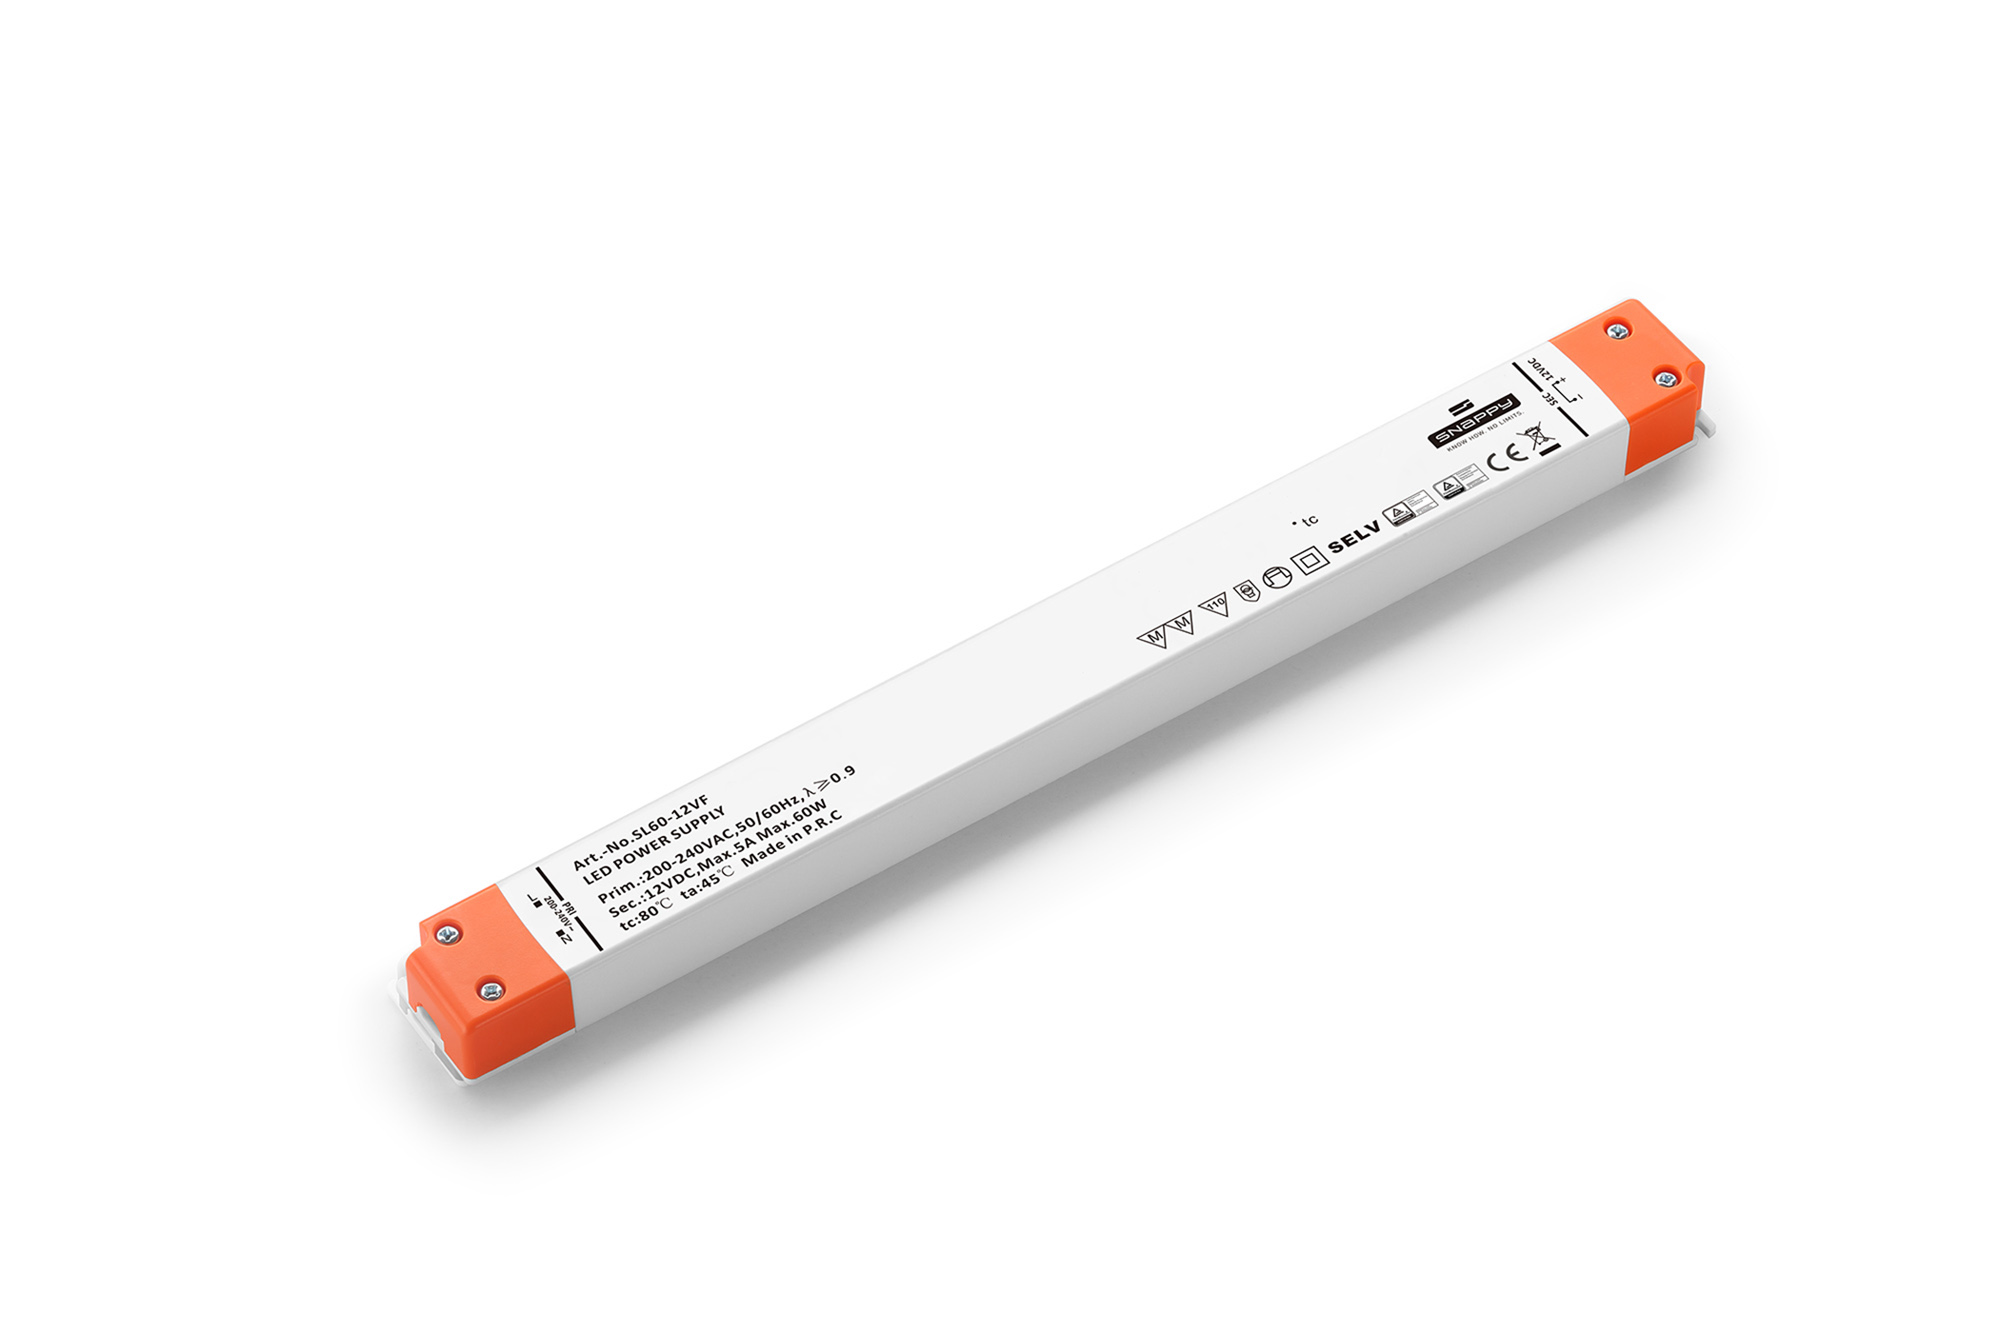 SL60-12VF  60W, Constant Voltage Non Dimmable LED Driver, 12VDC, 5A, Input 200-240VAC 50/60Hz, IP20.